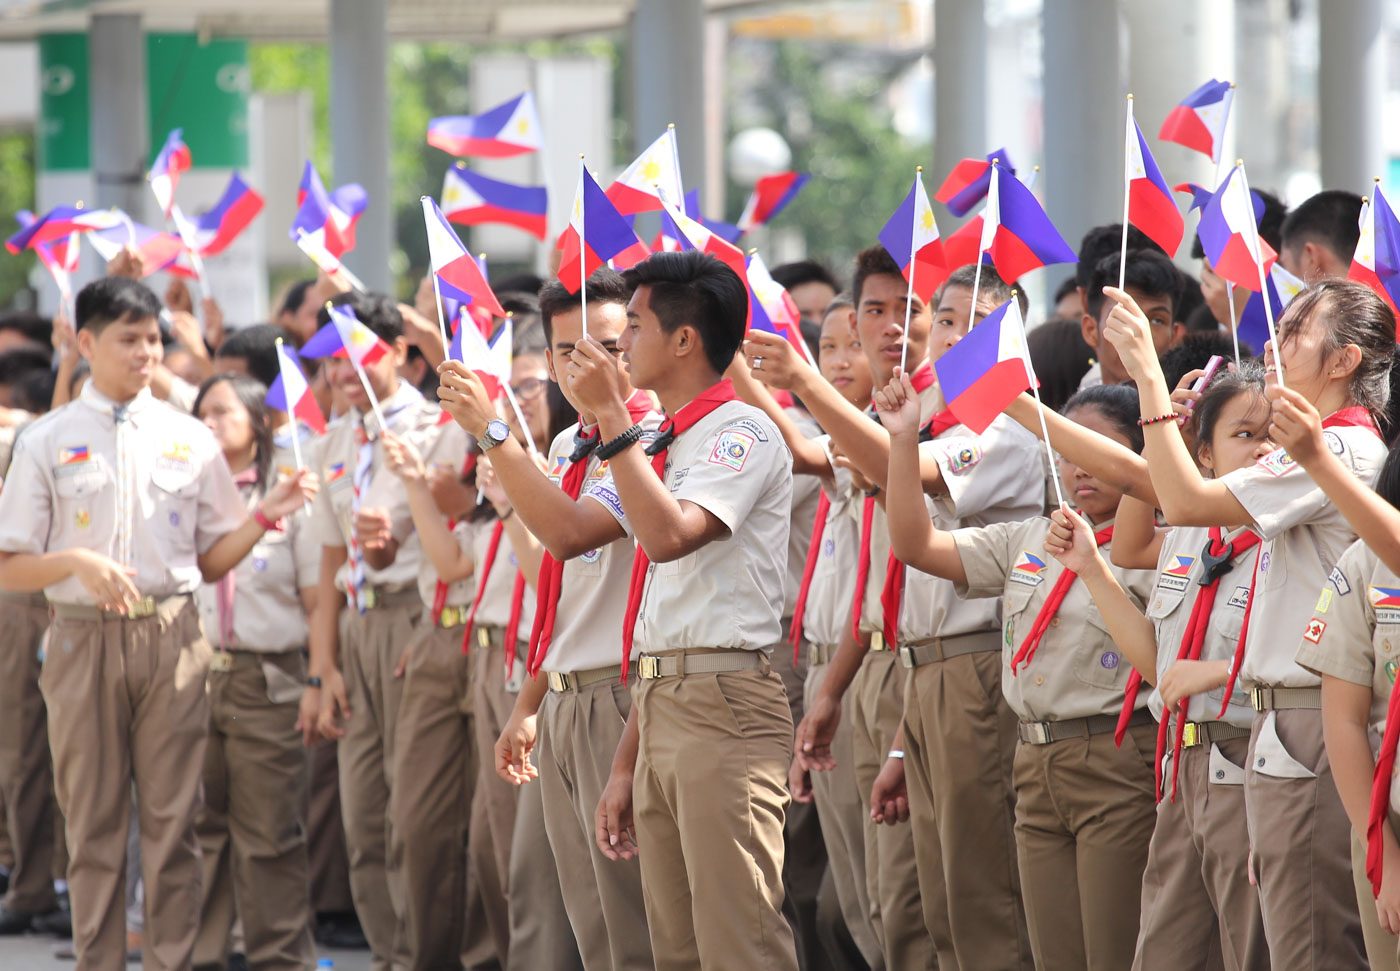 How to sing PH national anthem, and display symbols in proposed flag code